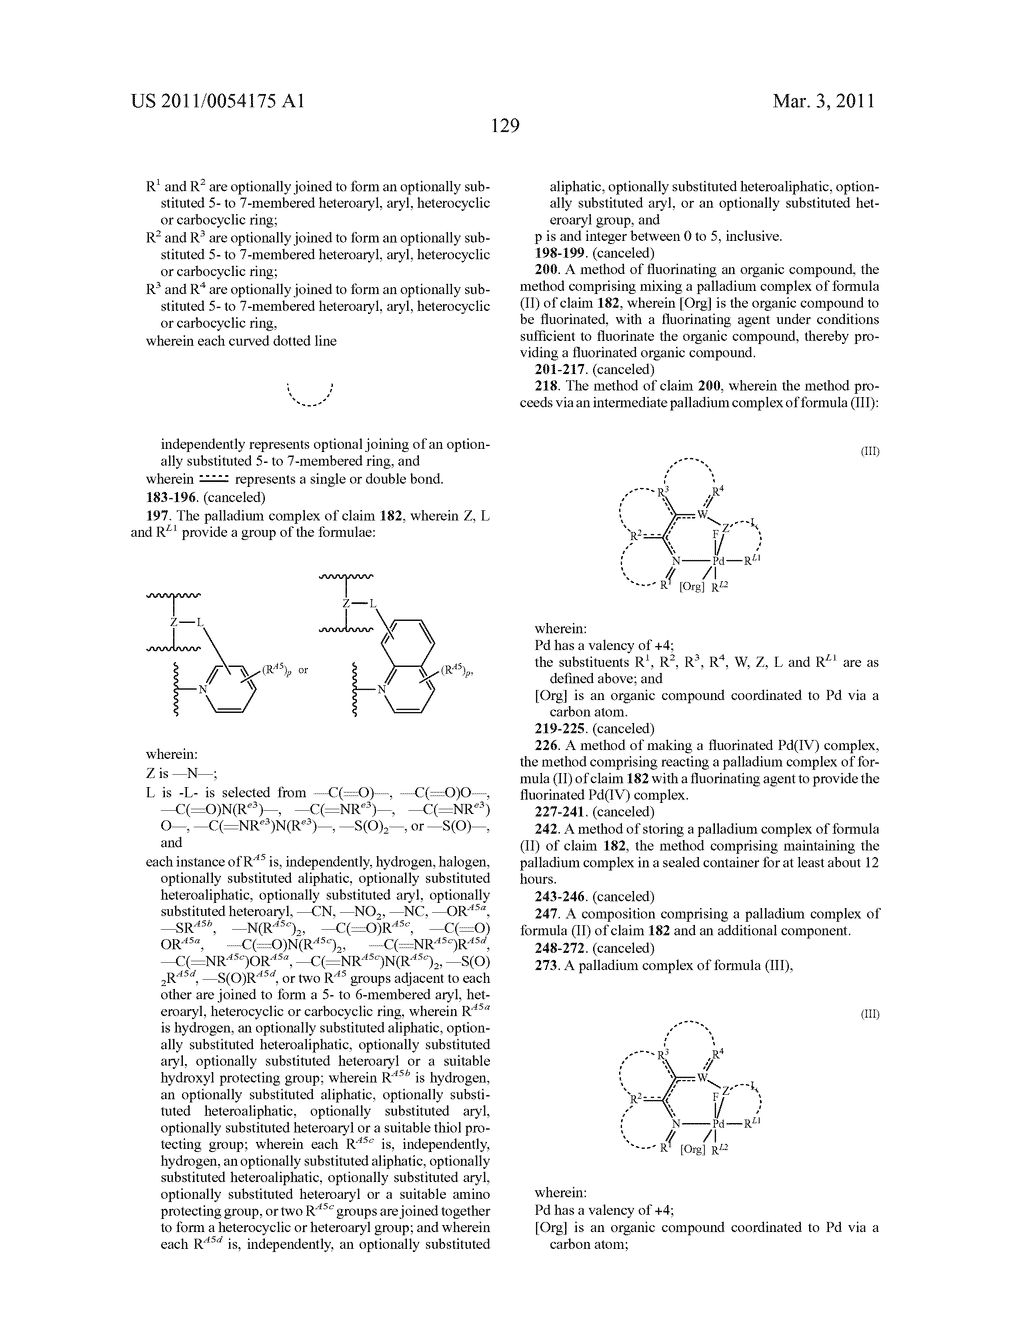 SYSTEM FOR FLUORINATING ORGANIC COMPOUNDS - diagram, schematic, and image 148